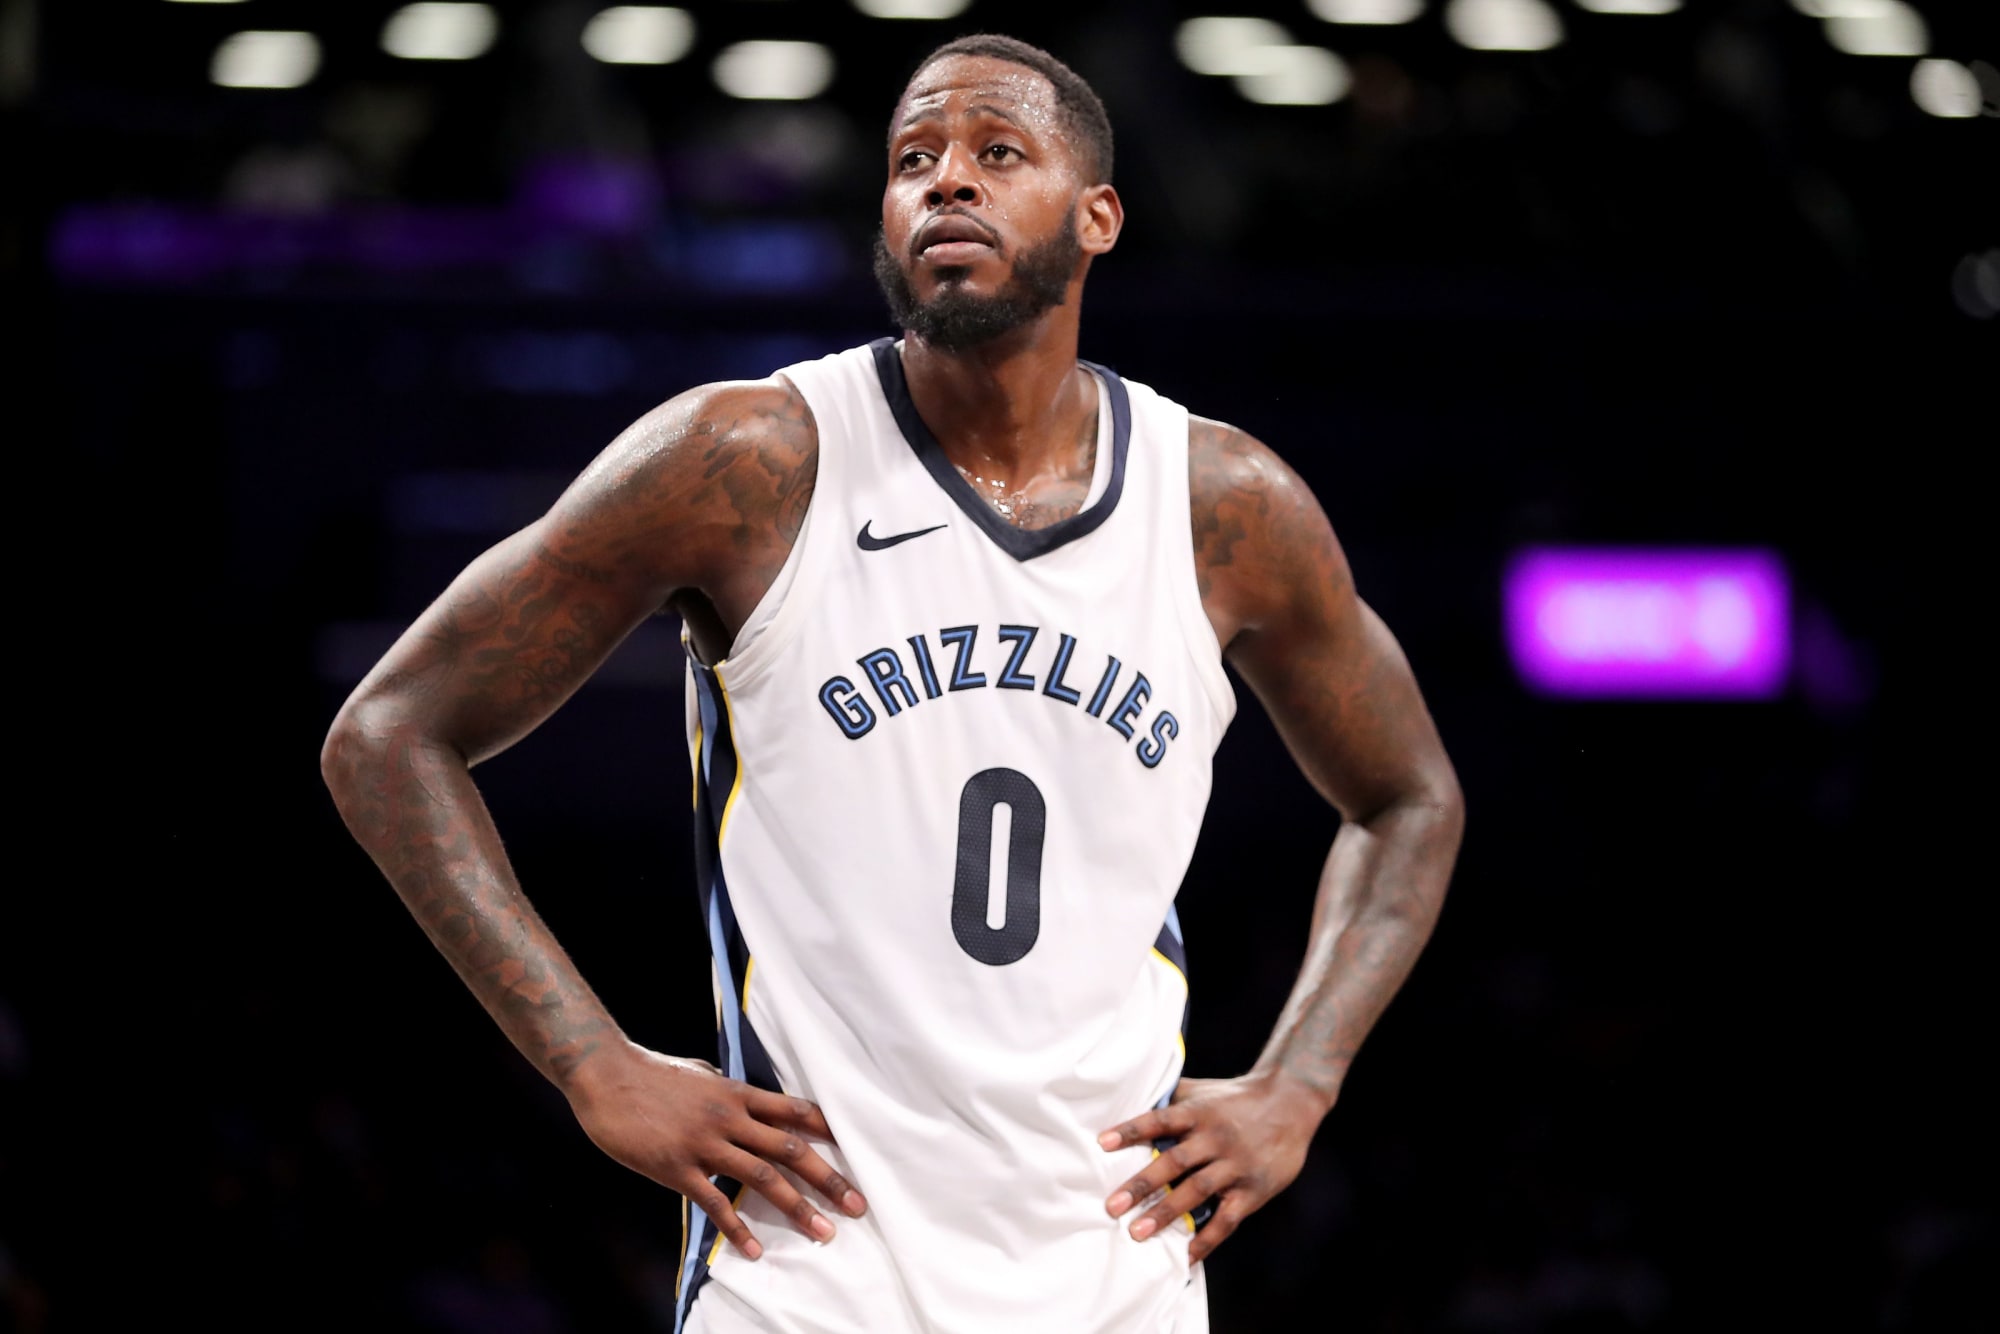 Grizzlies not serious about keeping JaMychal Green, agent says